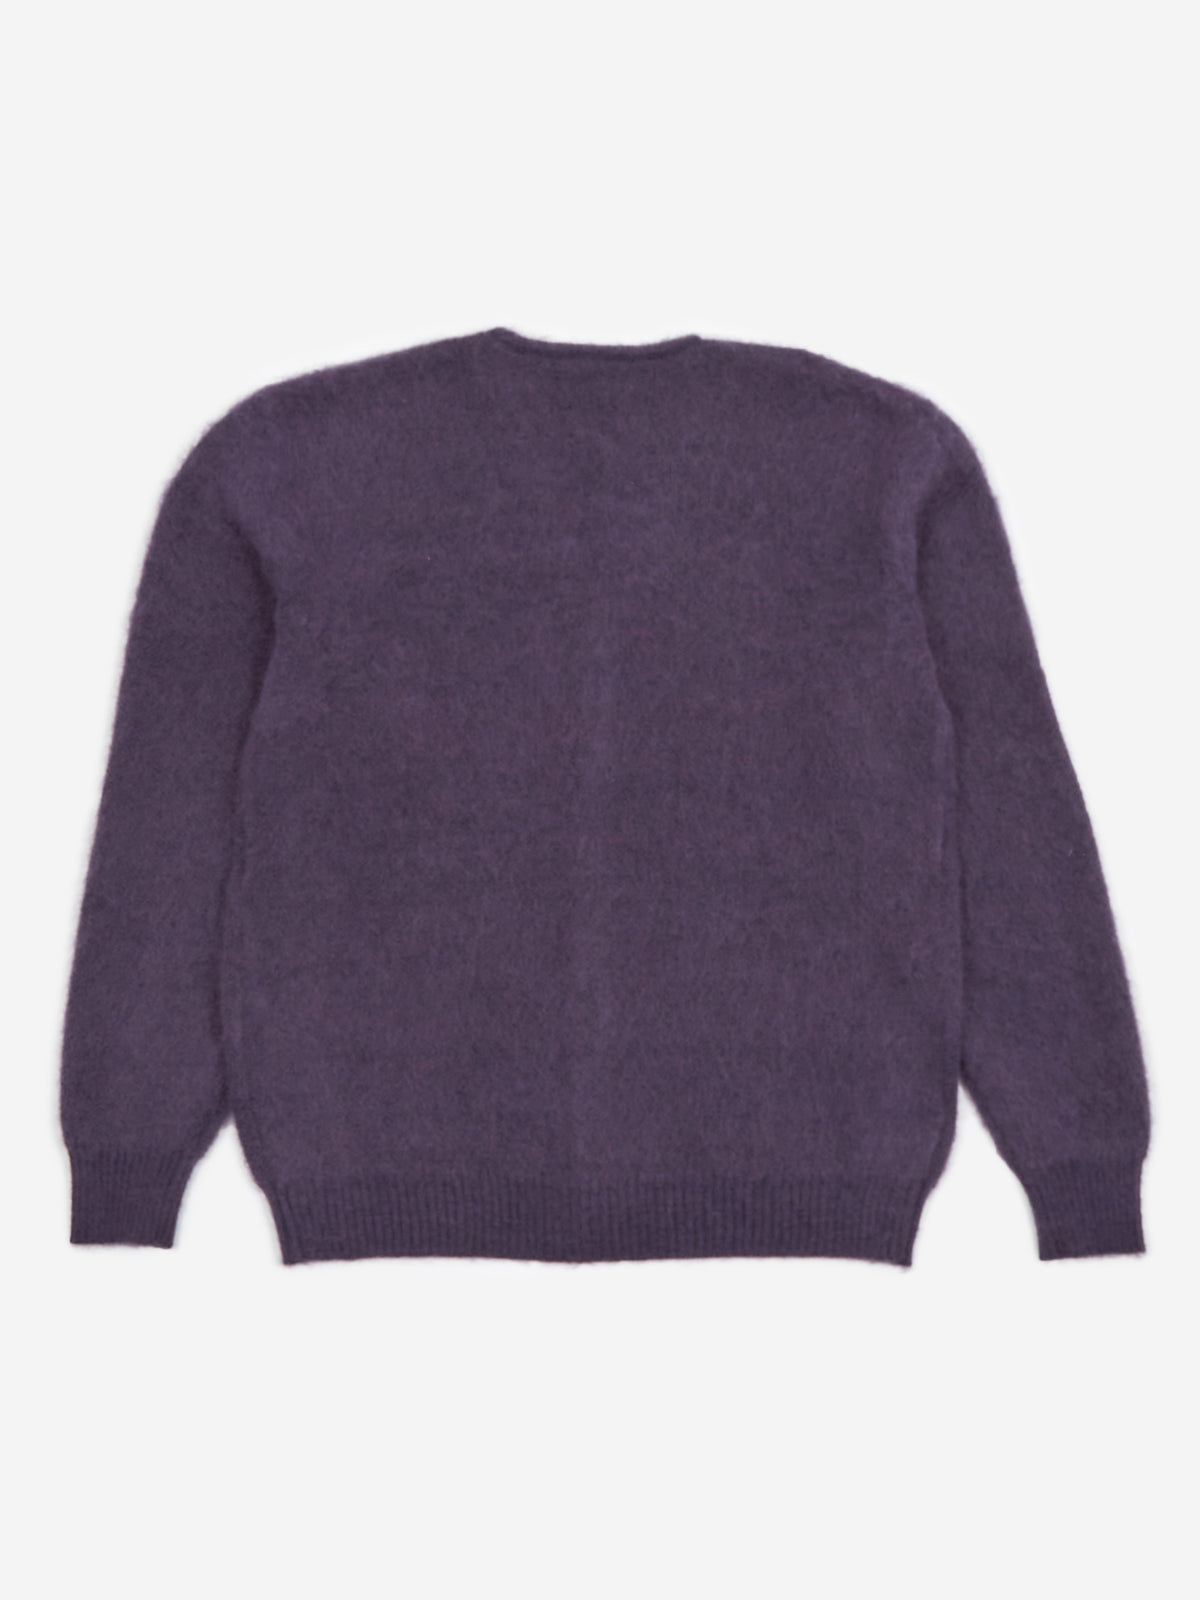 Find your Needles Mohair Cardigan - Solid - Purple Needles in a